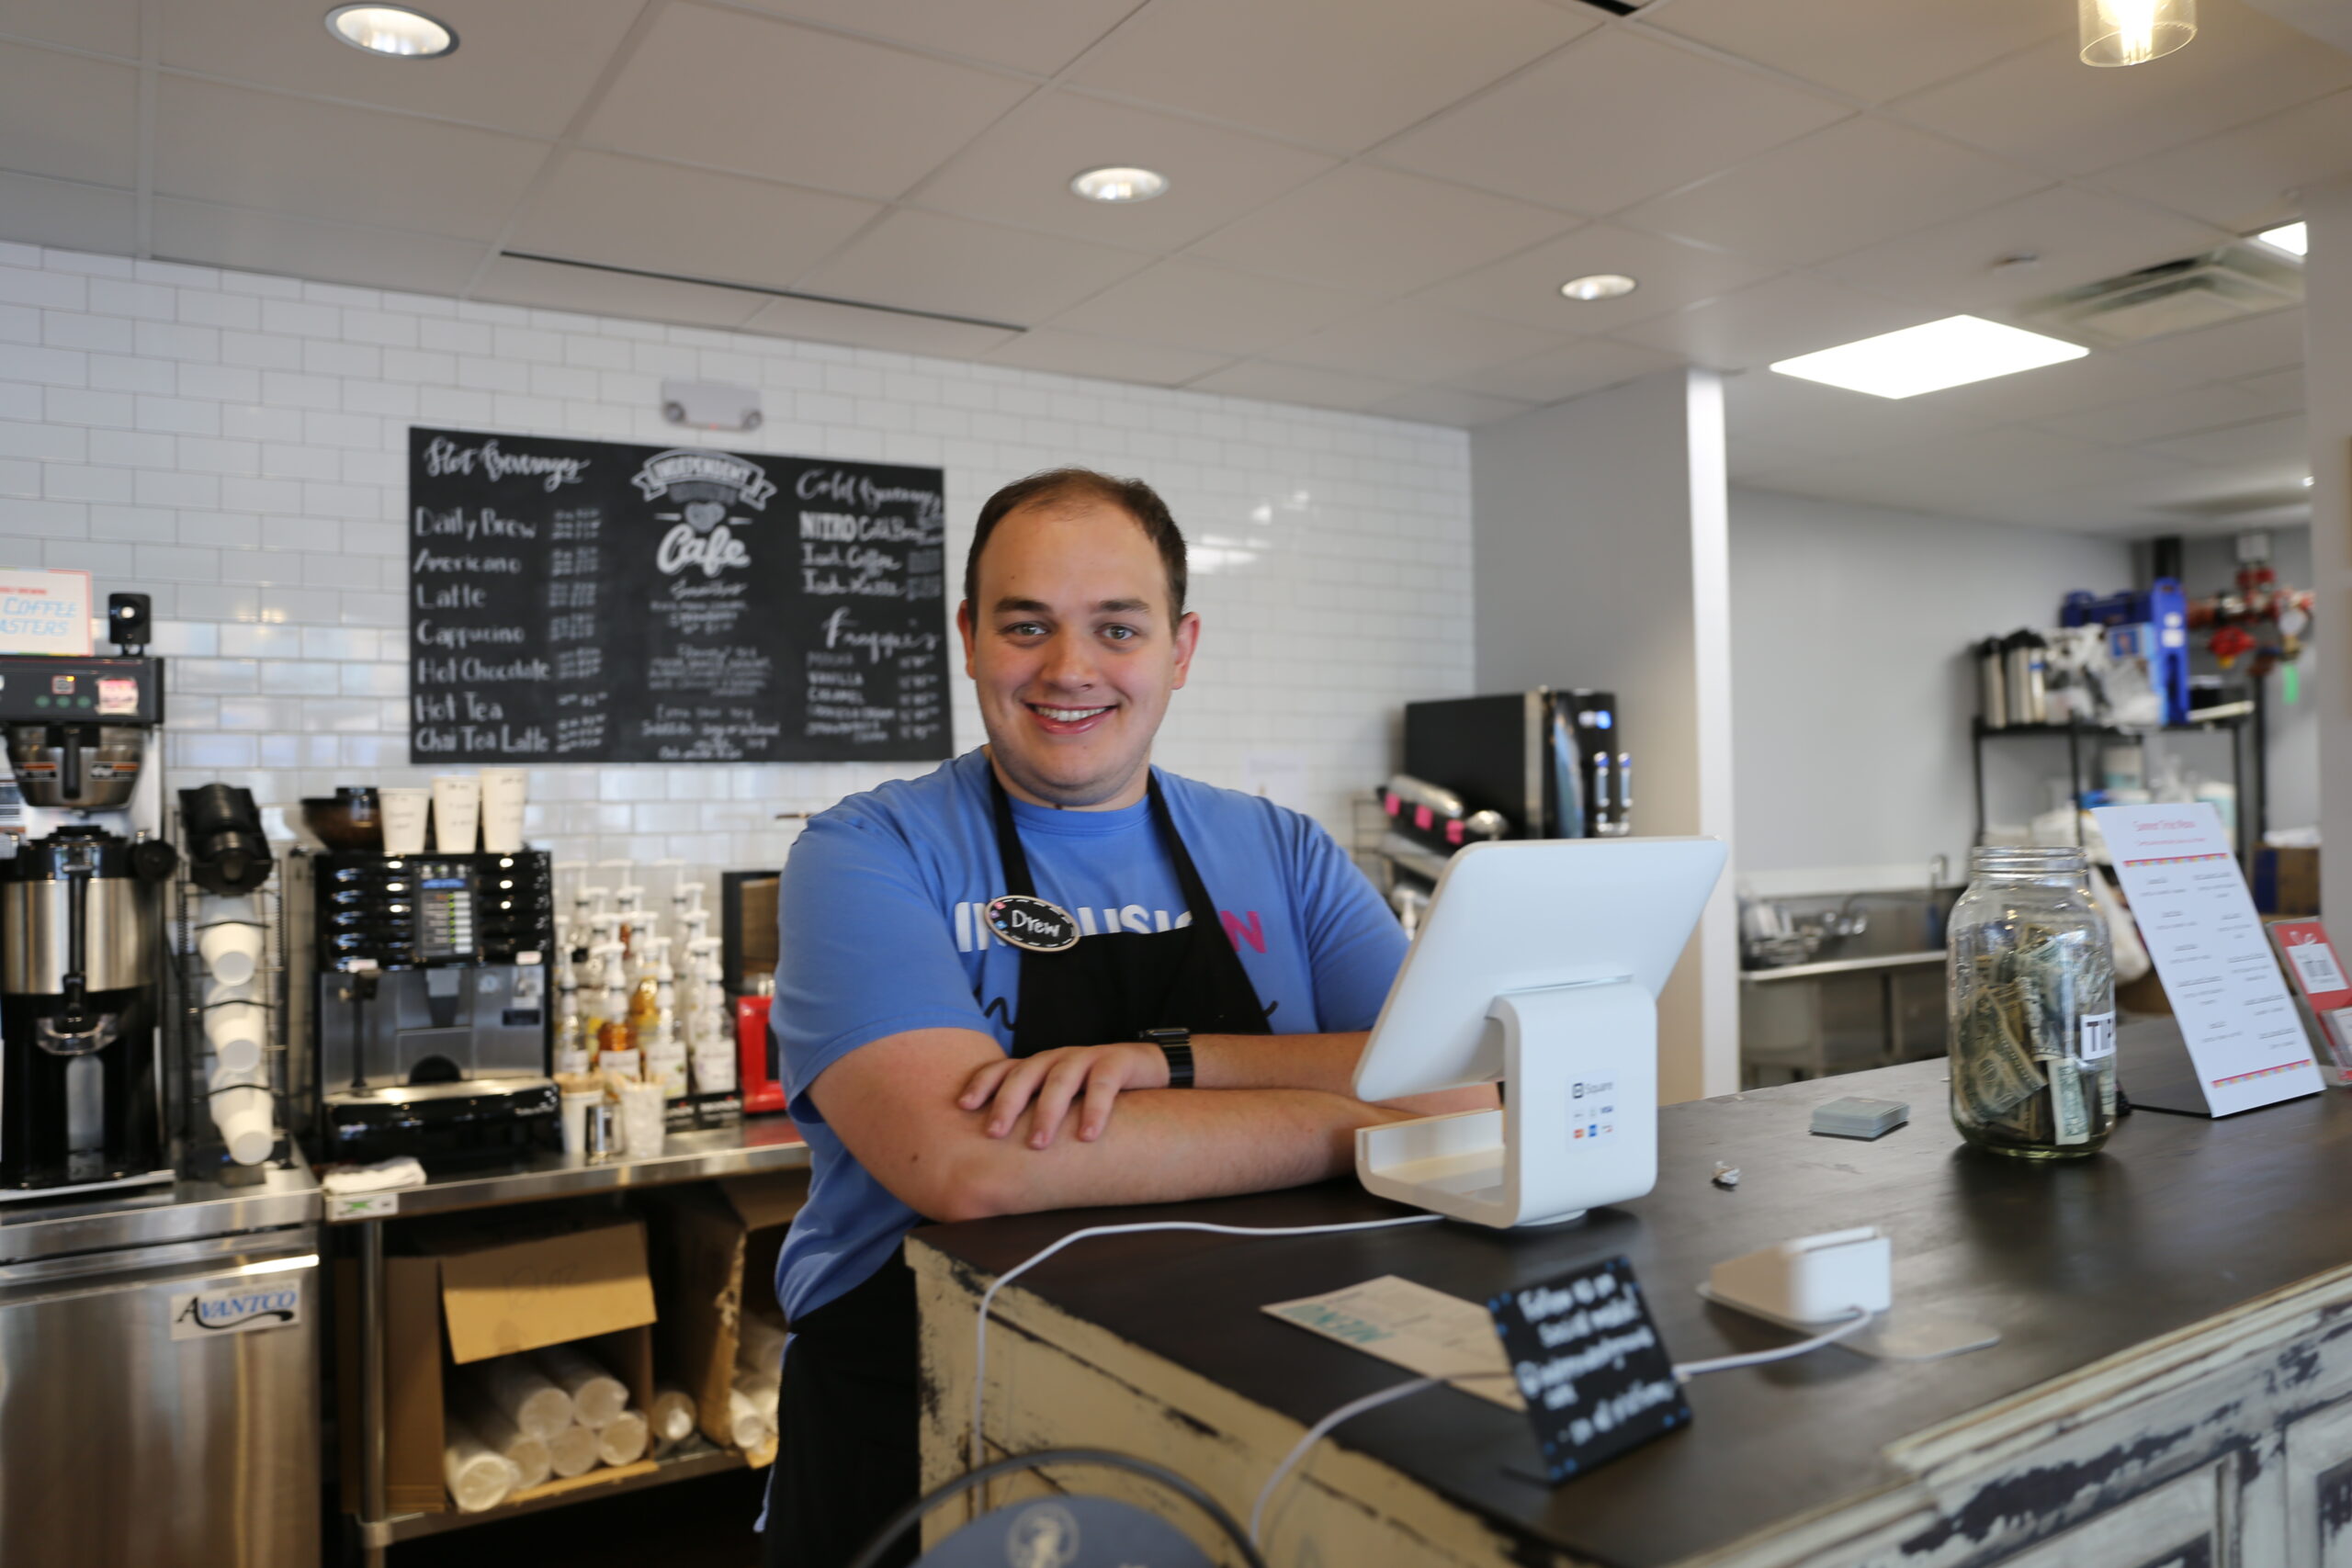 Coffee house provides students inclusion, comfort